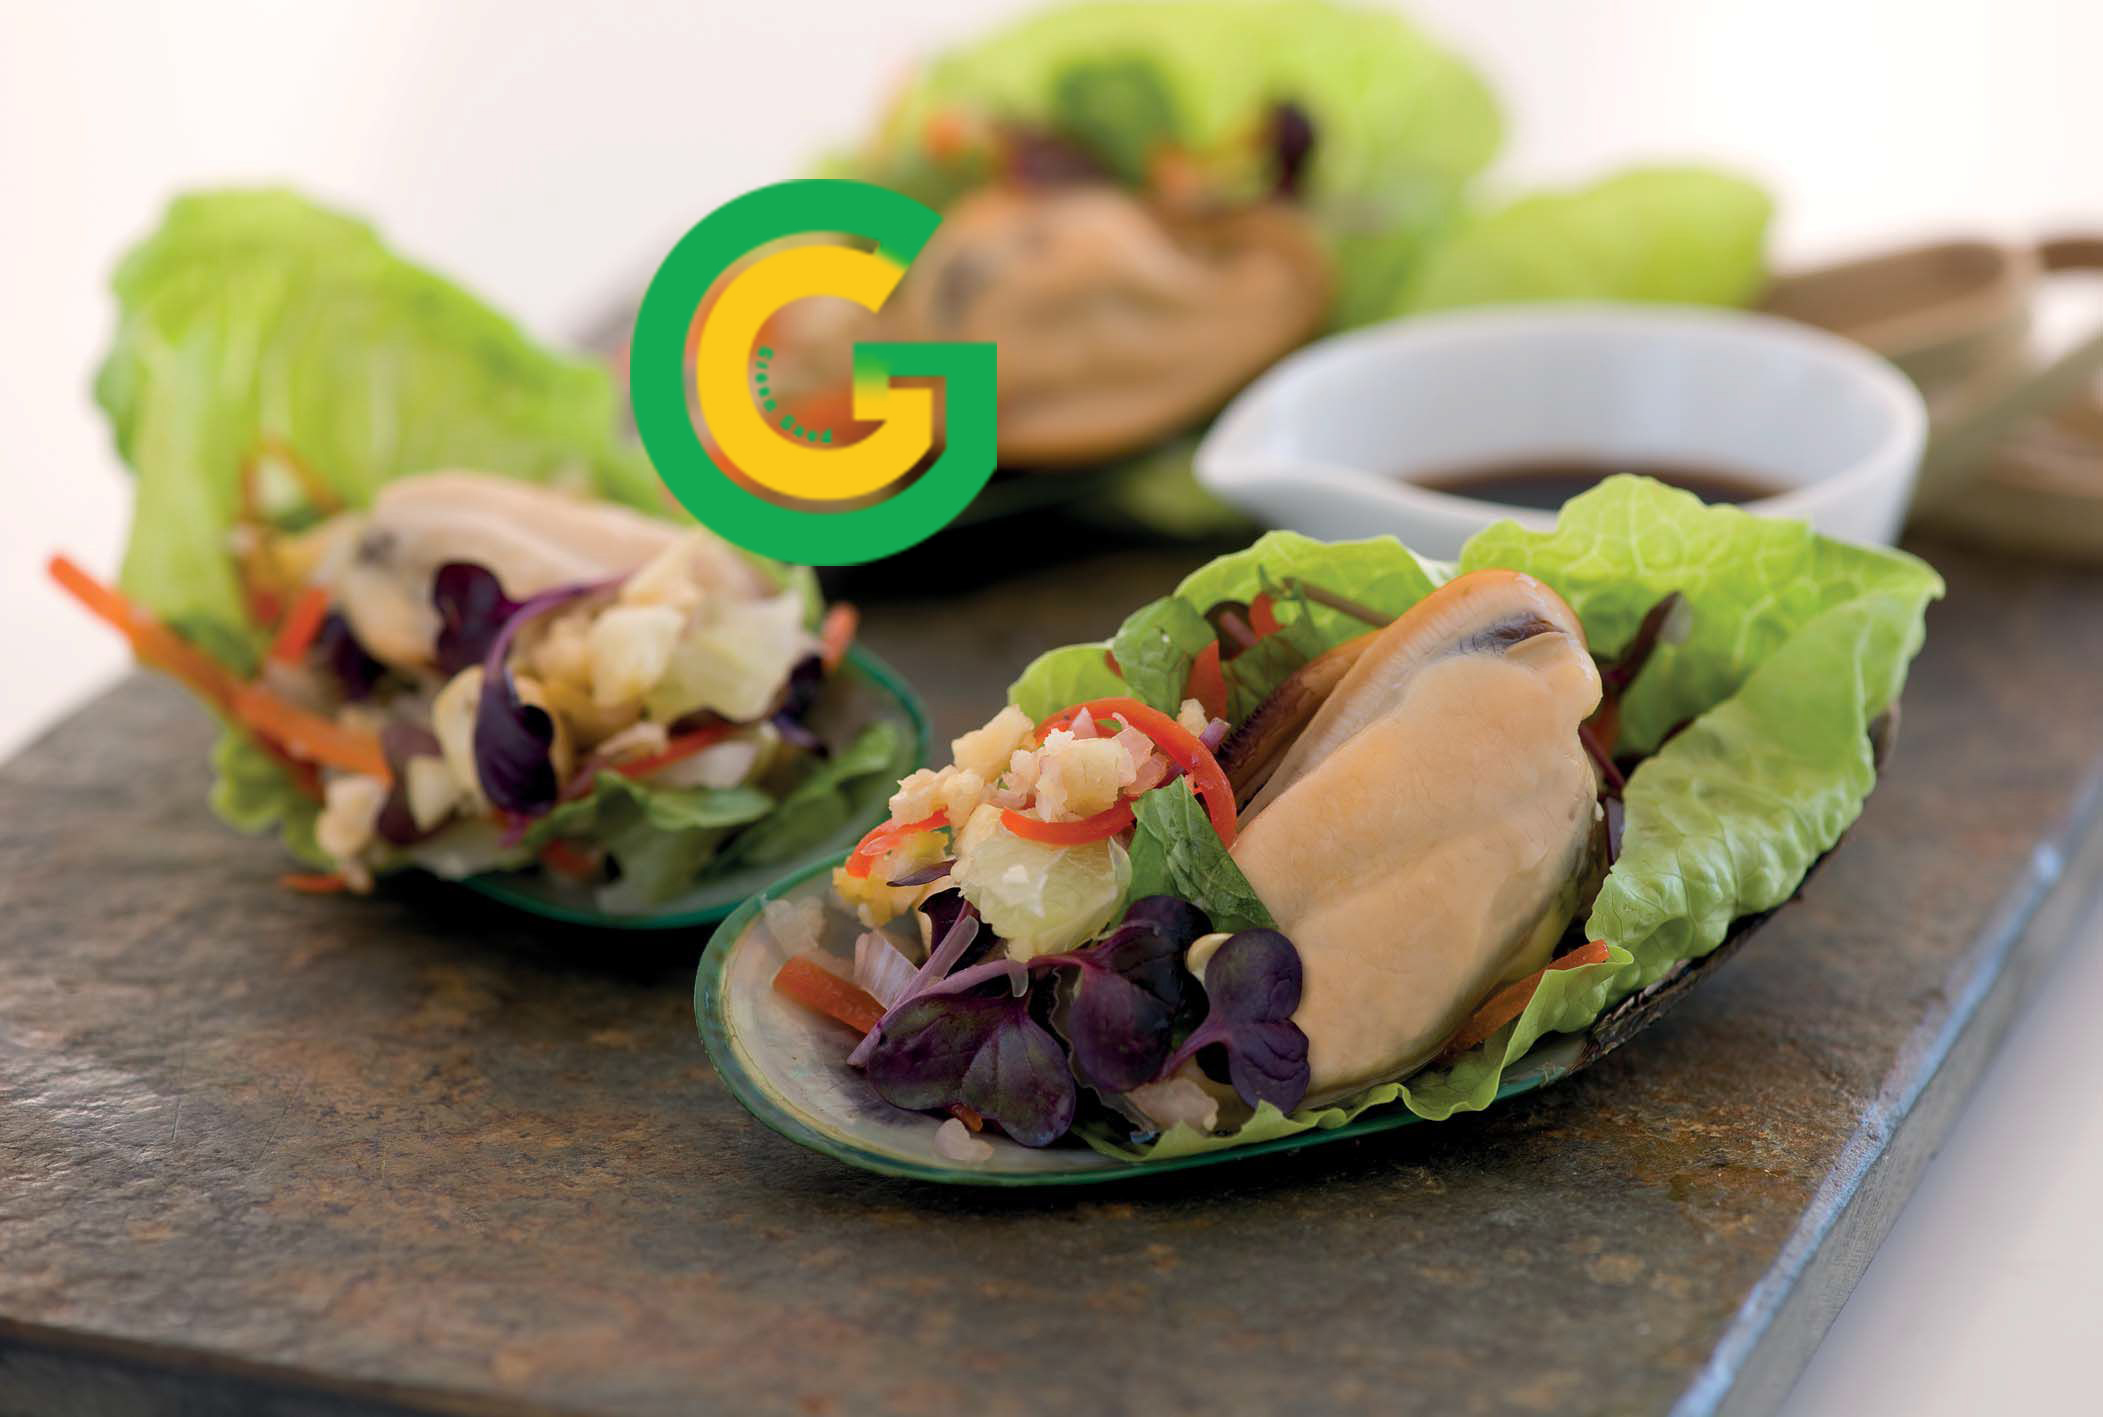 New-Zealand-Greenshell™-Mussel-lettuce-parcels-with-Thai-style-dressing copy